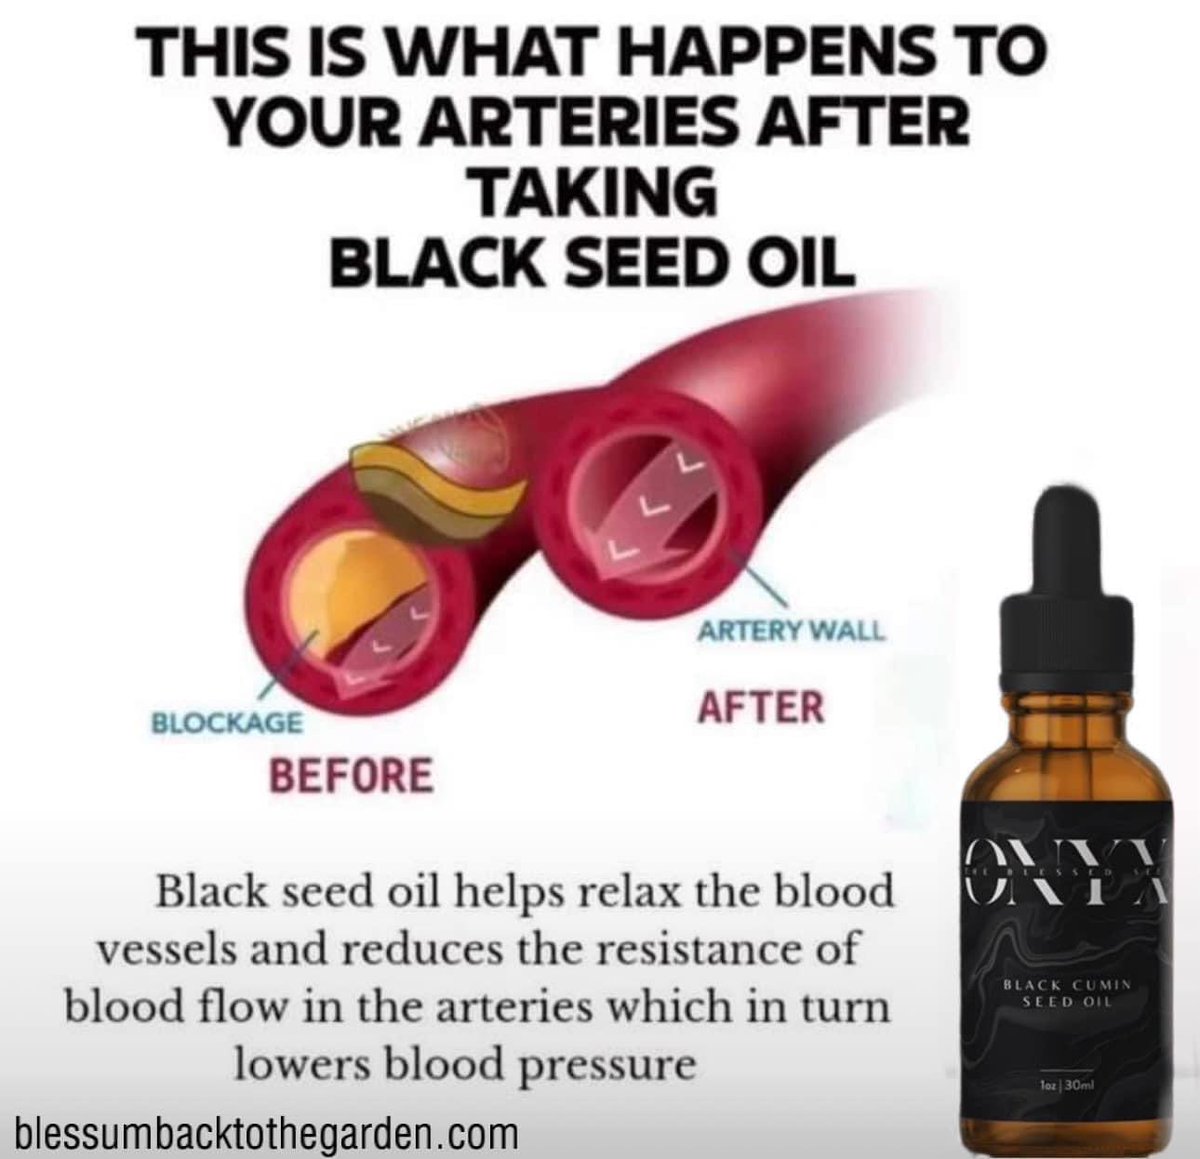 I think I’m going to buy some black seed oil today.  The Egyptians said it cured everything but death.  I believe them.